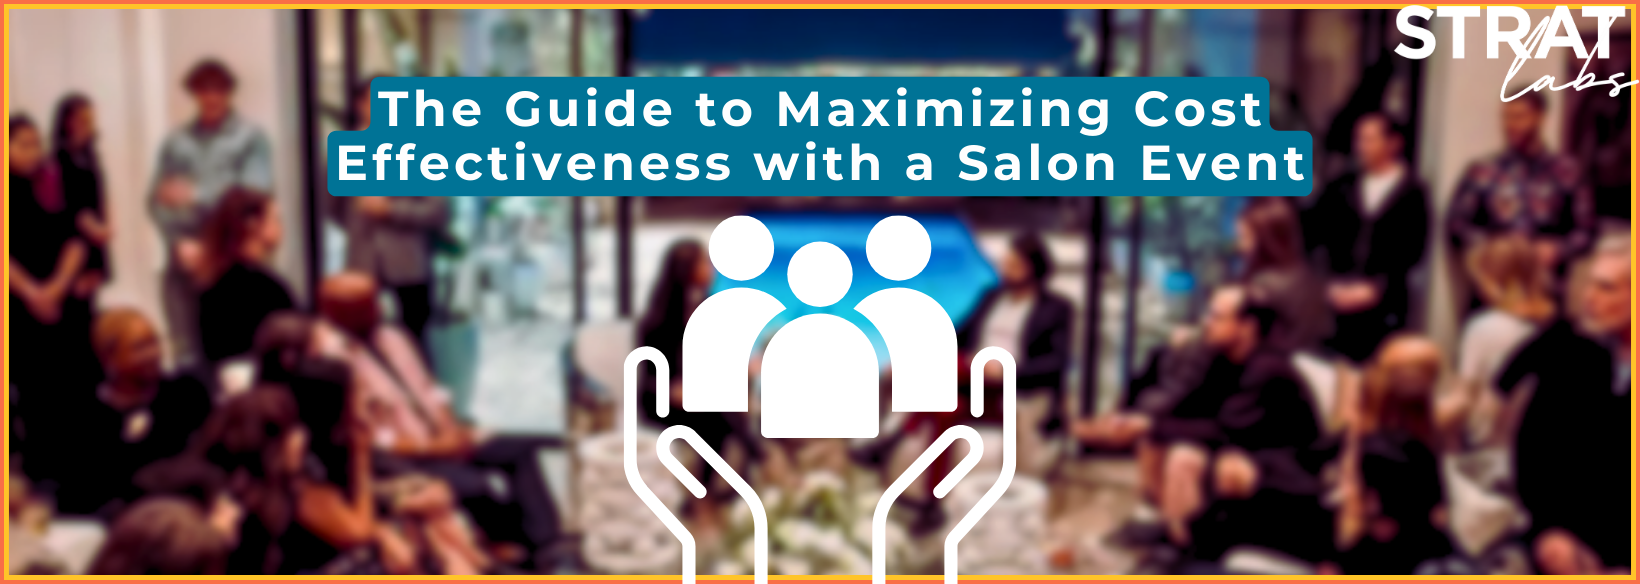 The Guide to Maximizing Cost-Effectiveness with a Salon Event